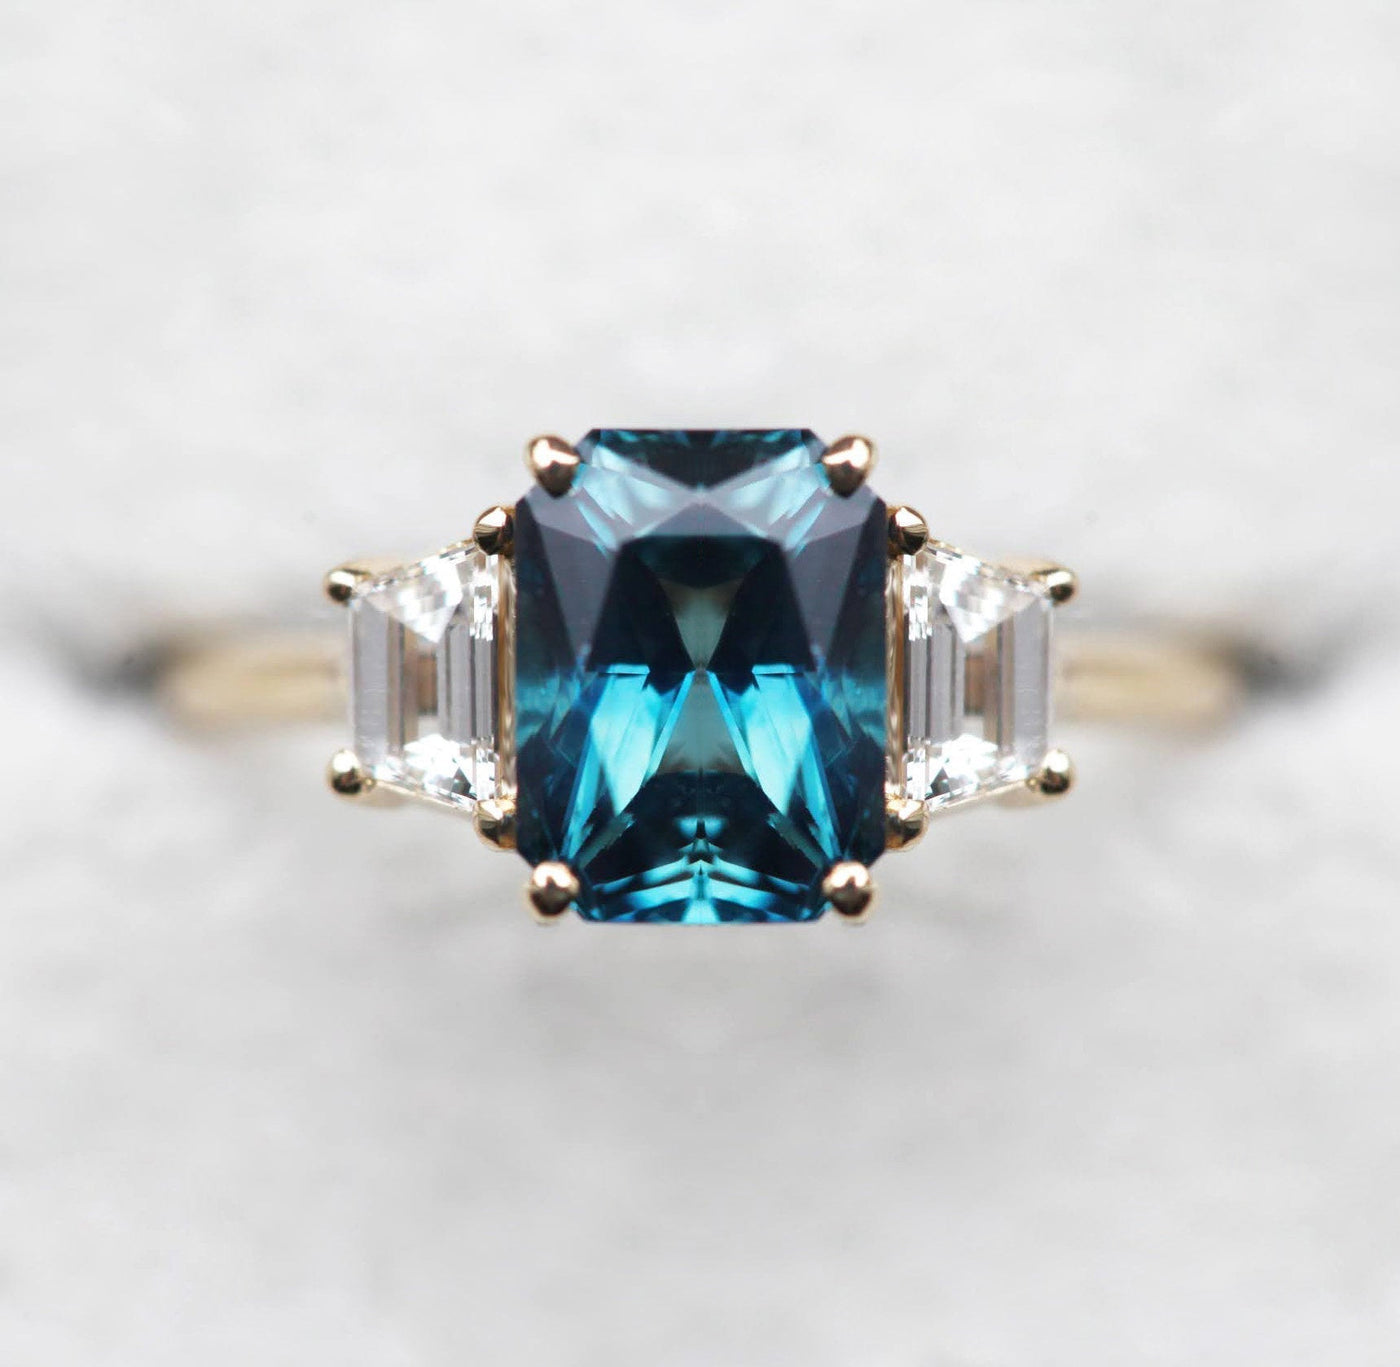 Radiant-cut sapphire ring with side diamonds